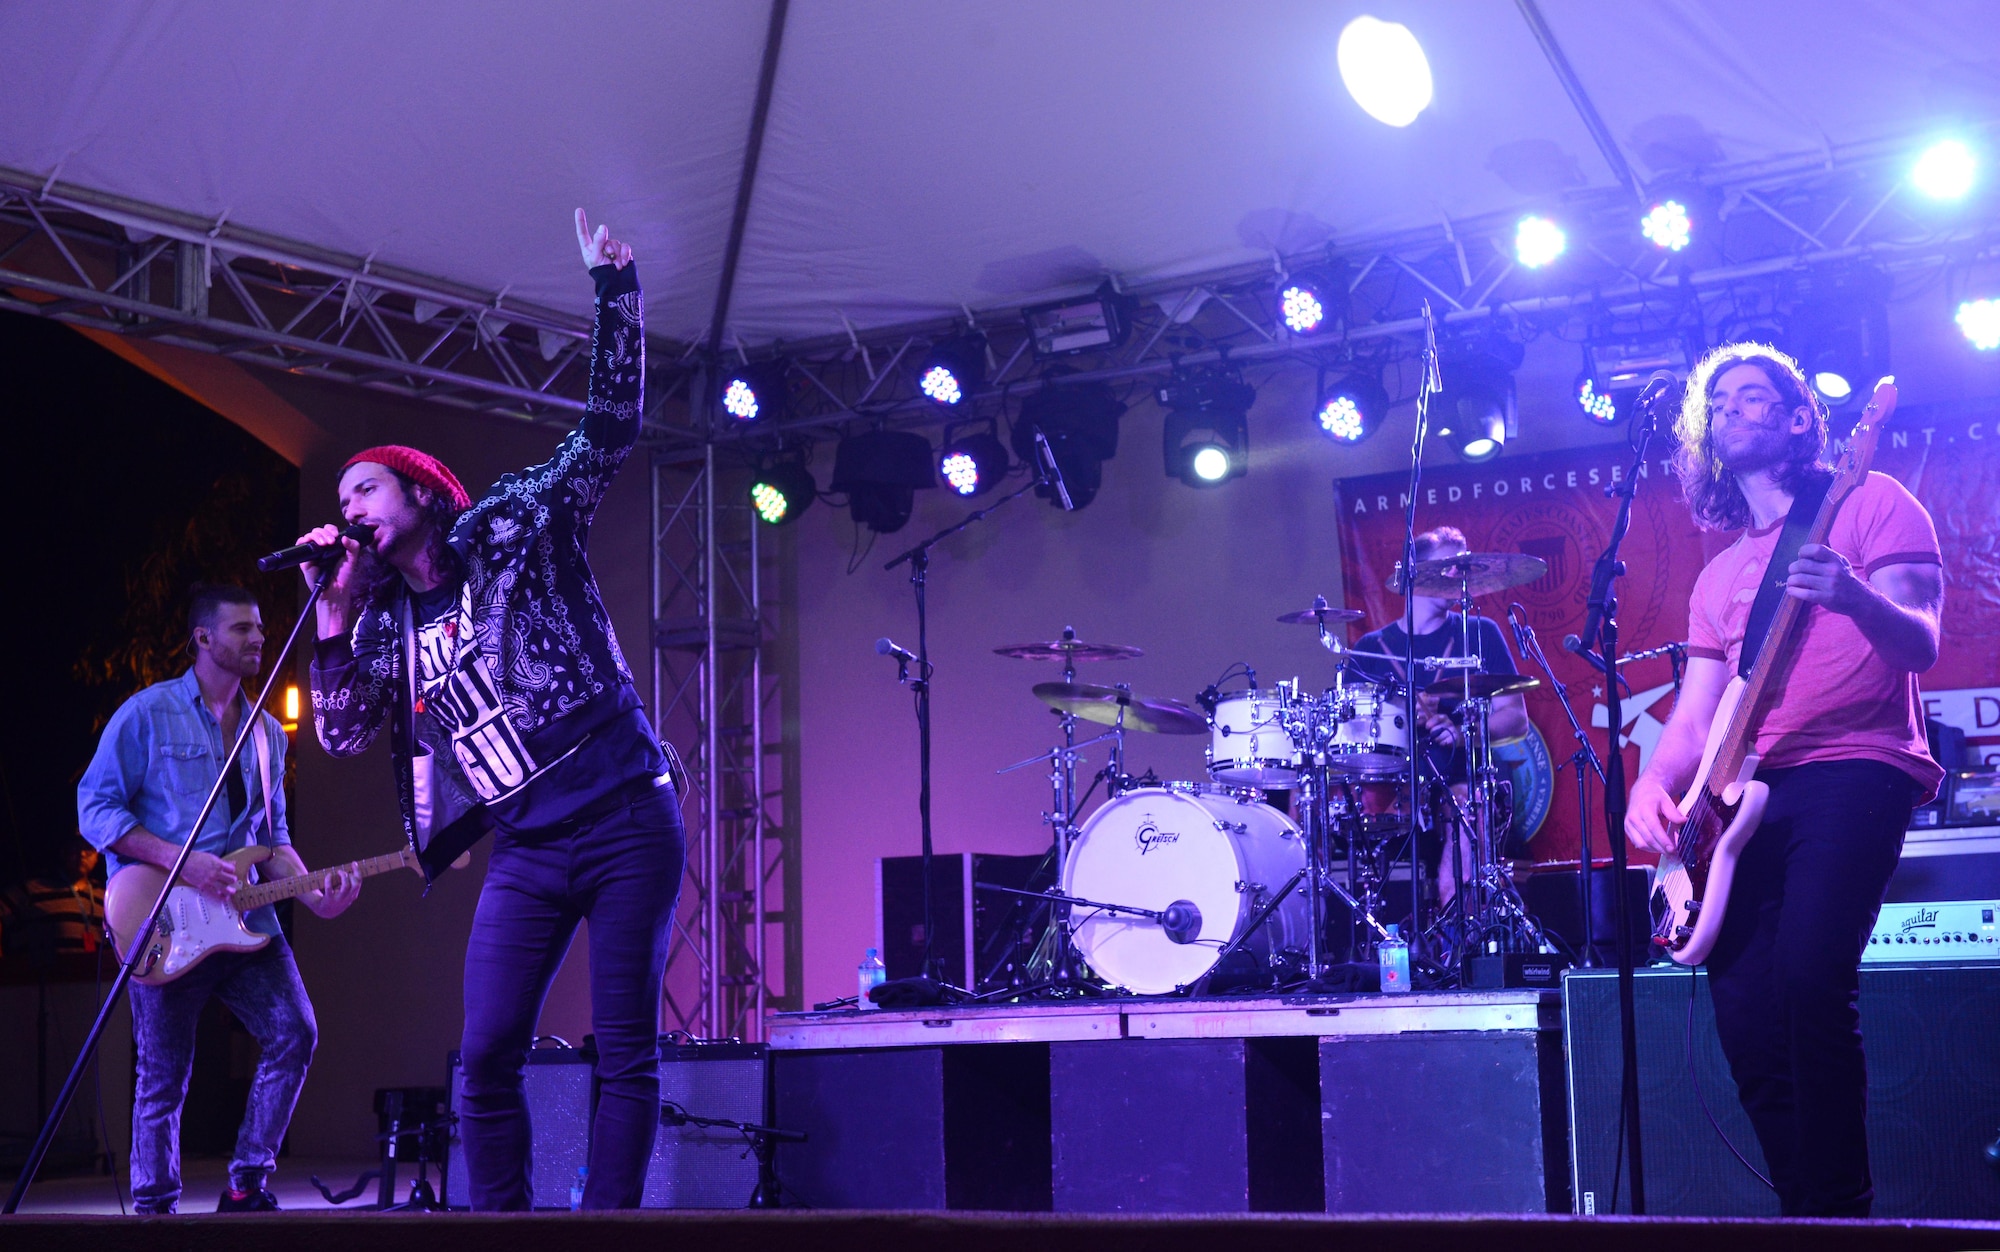 The Canadian reggae fusion band Magic! performs for service members and their families Jan. 14, 2016, at Andersen Air Force Base, Guam. The free event was hosted by the Department of Defense’s Armed Forces Entertainment and drew a crowd of 2,000 people. (U.S. Air Force photo/Airman 1st Class Arielle Vasquez)